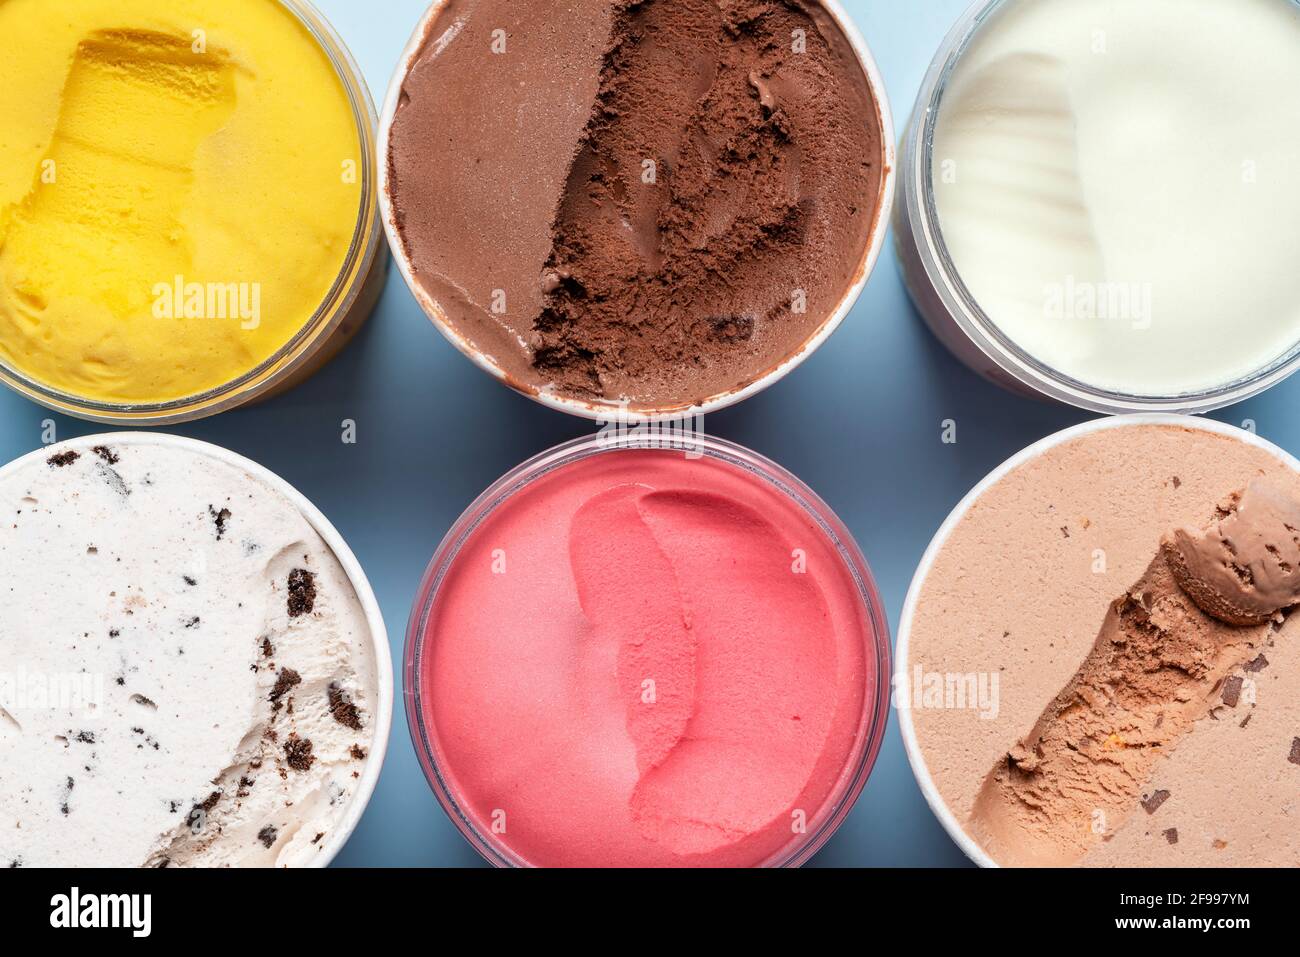 A view of several containers full of popular ice cream toppings on